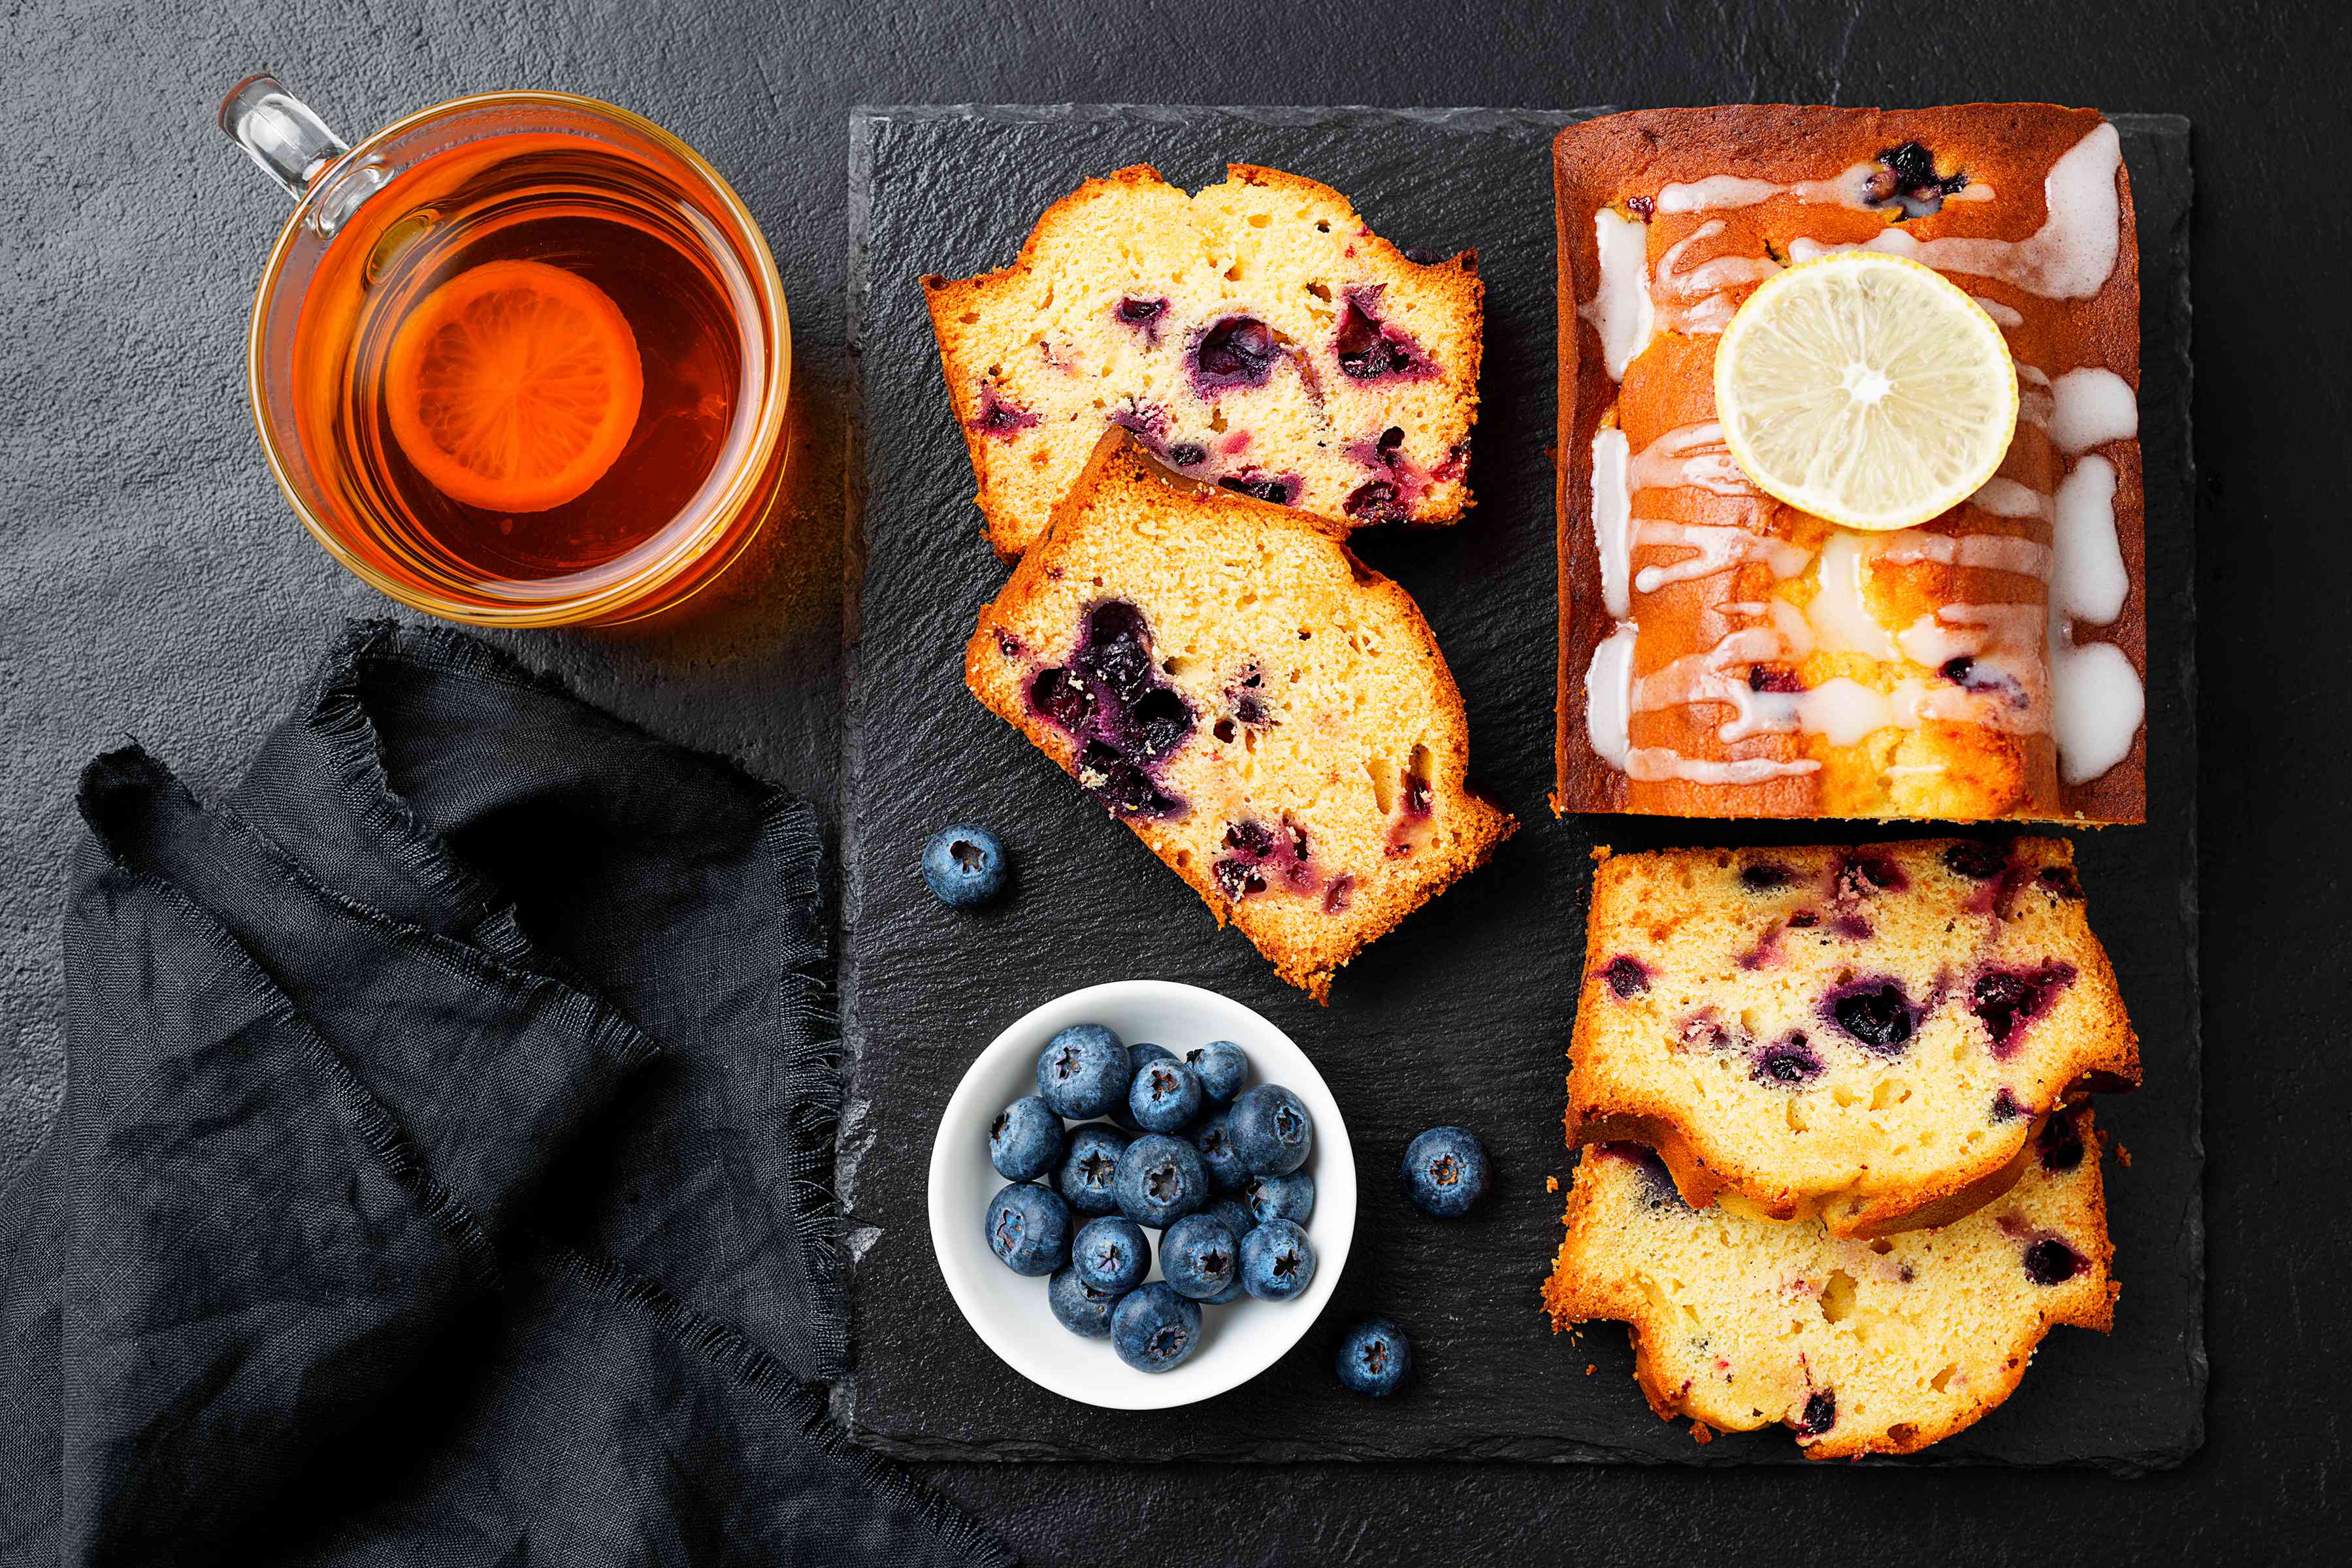 Vegan blueberry lemon cake presented on a black serving board with a bowl of blueberries, alongside a cup of herbal tea.